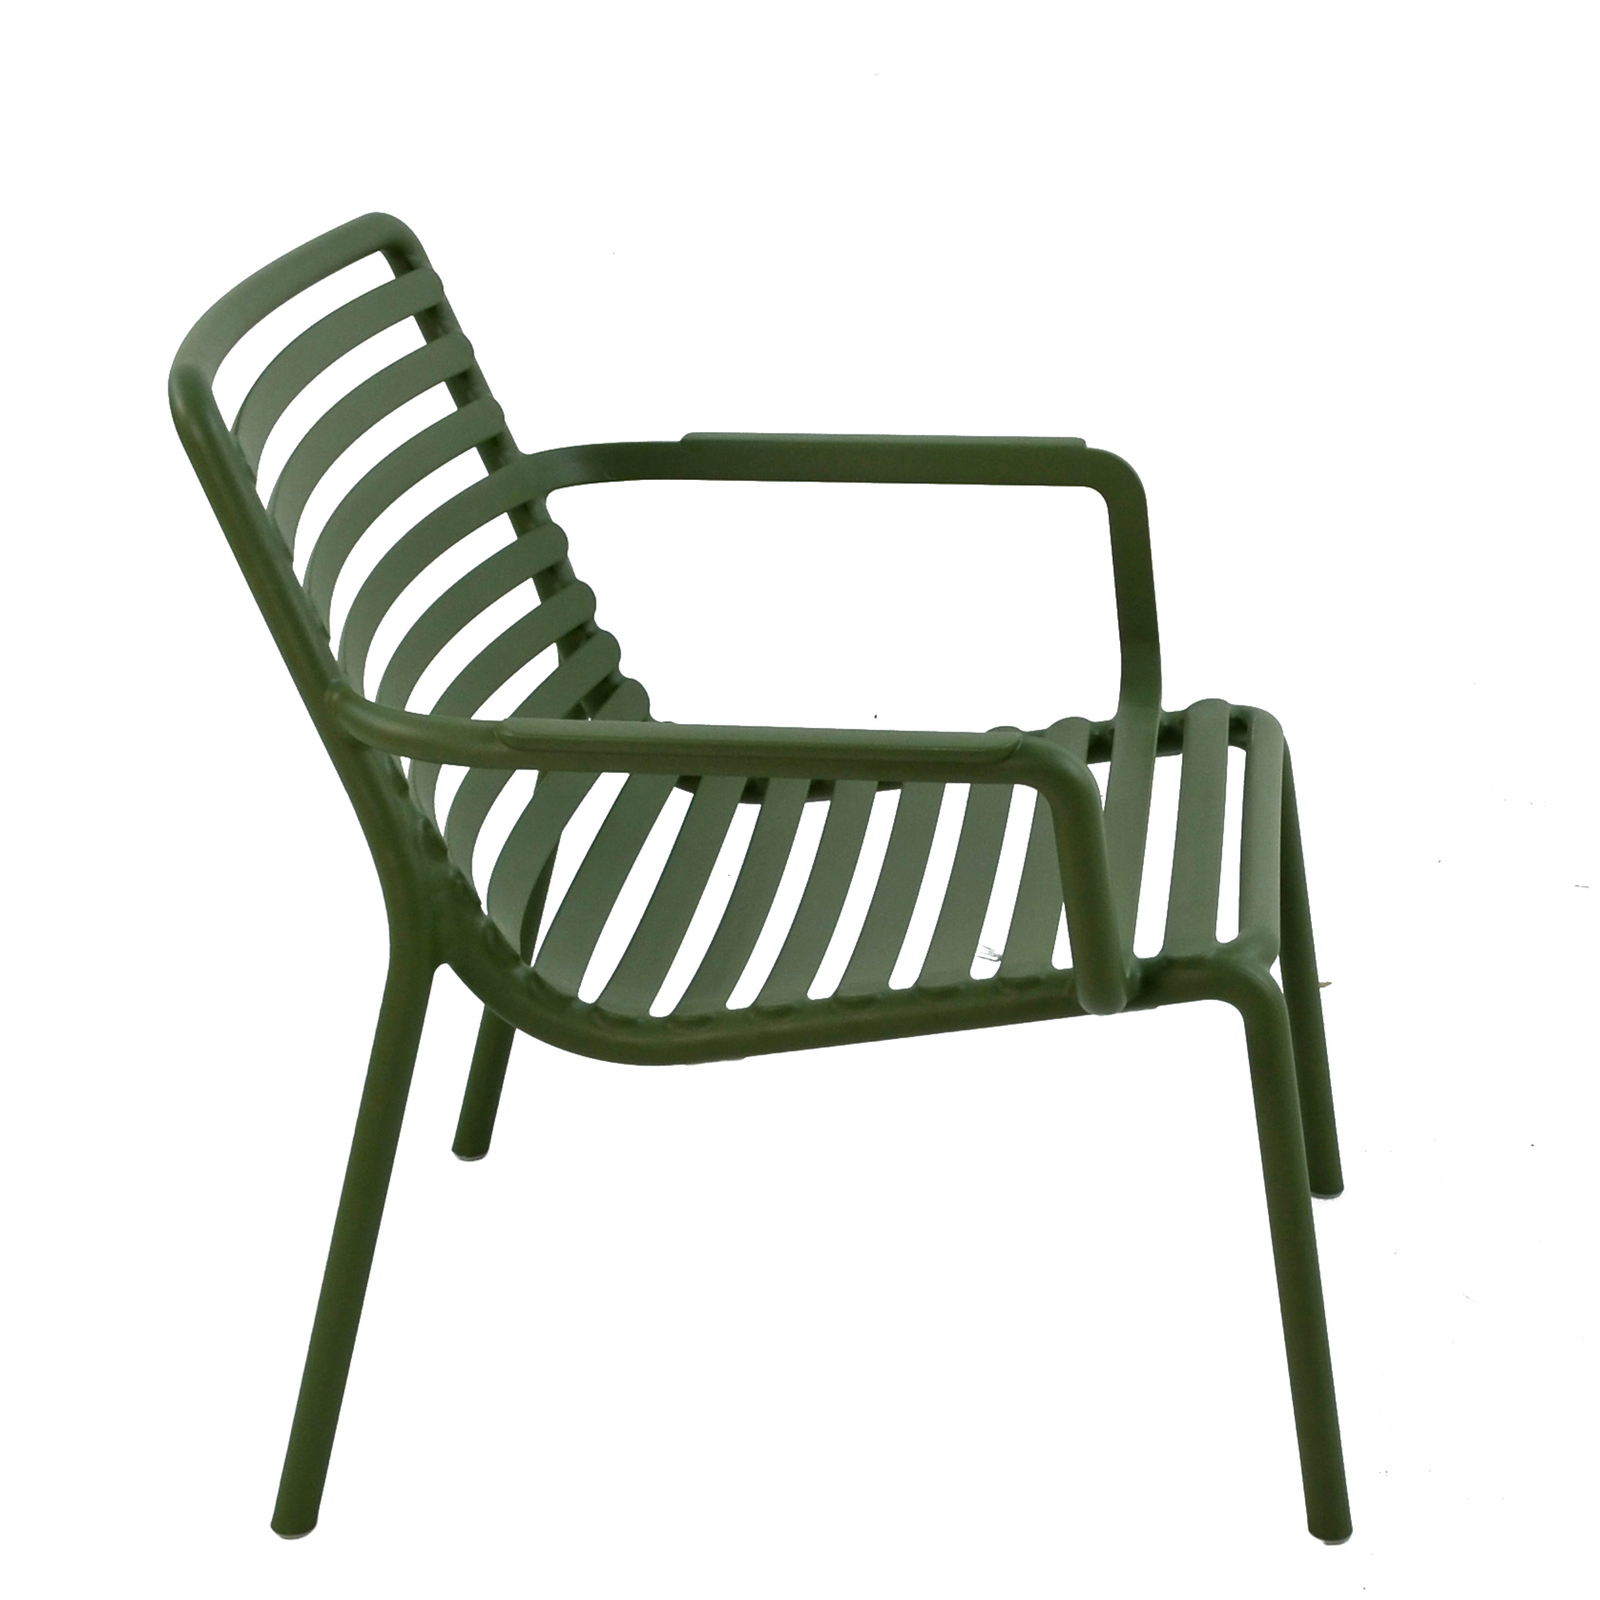 Nardi Doga Relax Garden Chair in Olive Green (Pack of 2) Chairs Nardi Default Title  